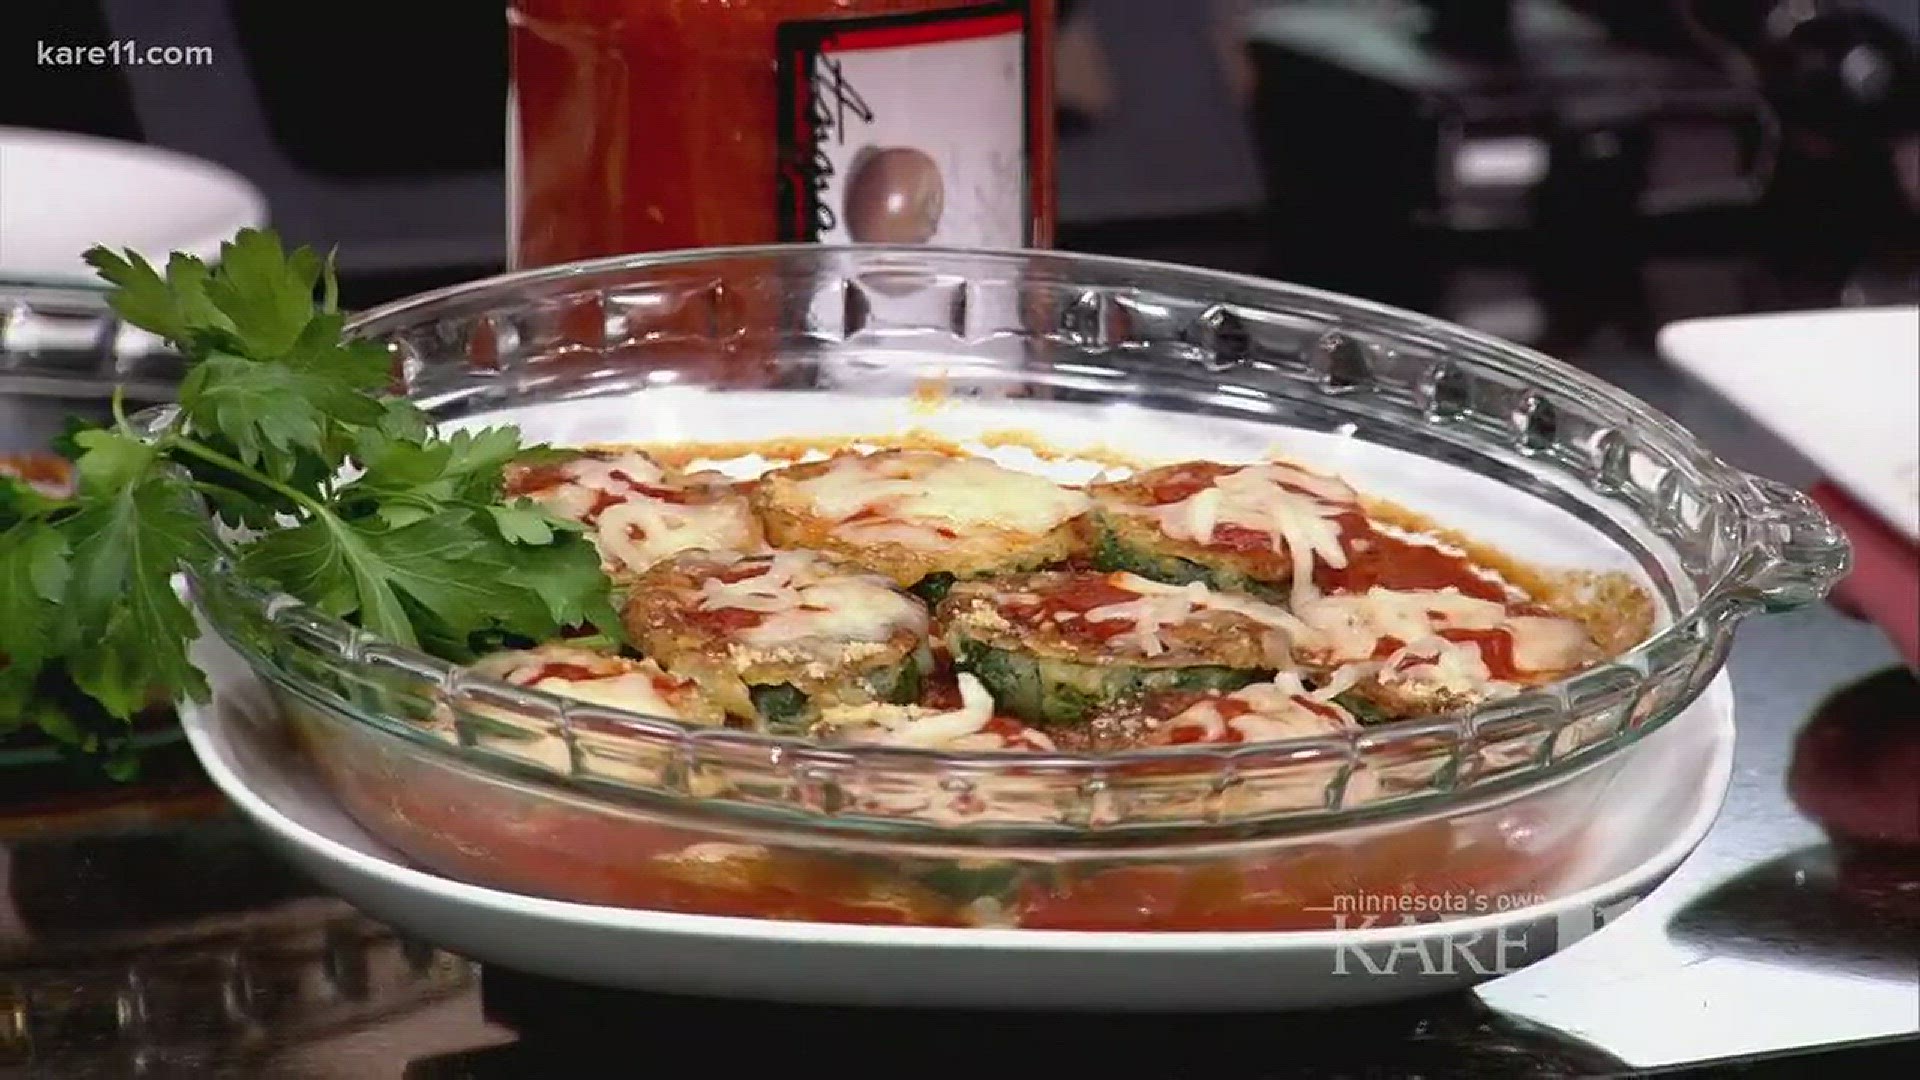 Chef Lisa O'Connell has some great chicken parmesan recipes for you! http://kare11.tv/2HbUnsv